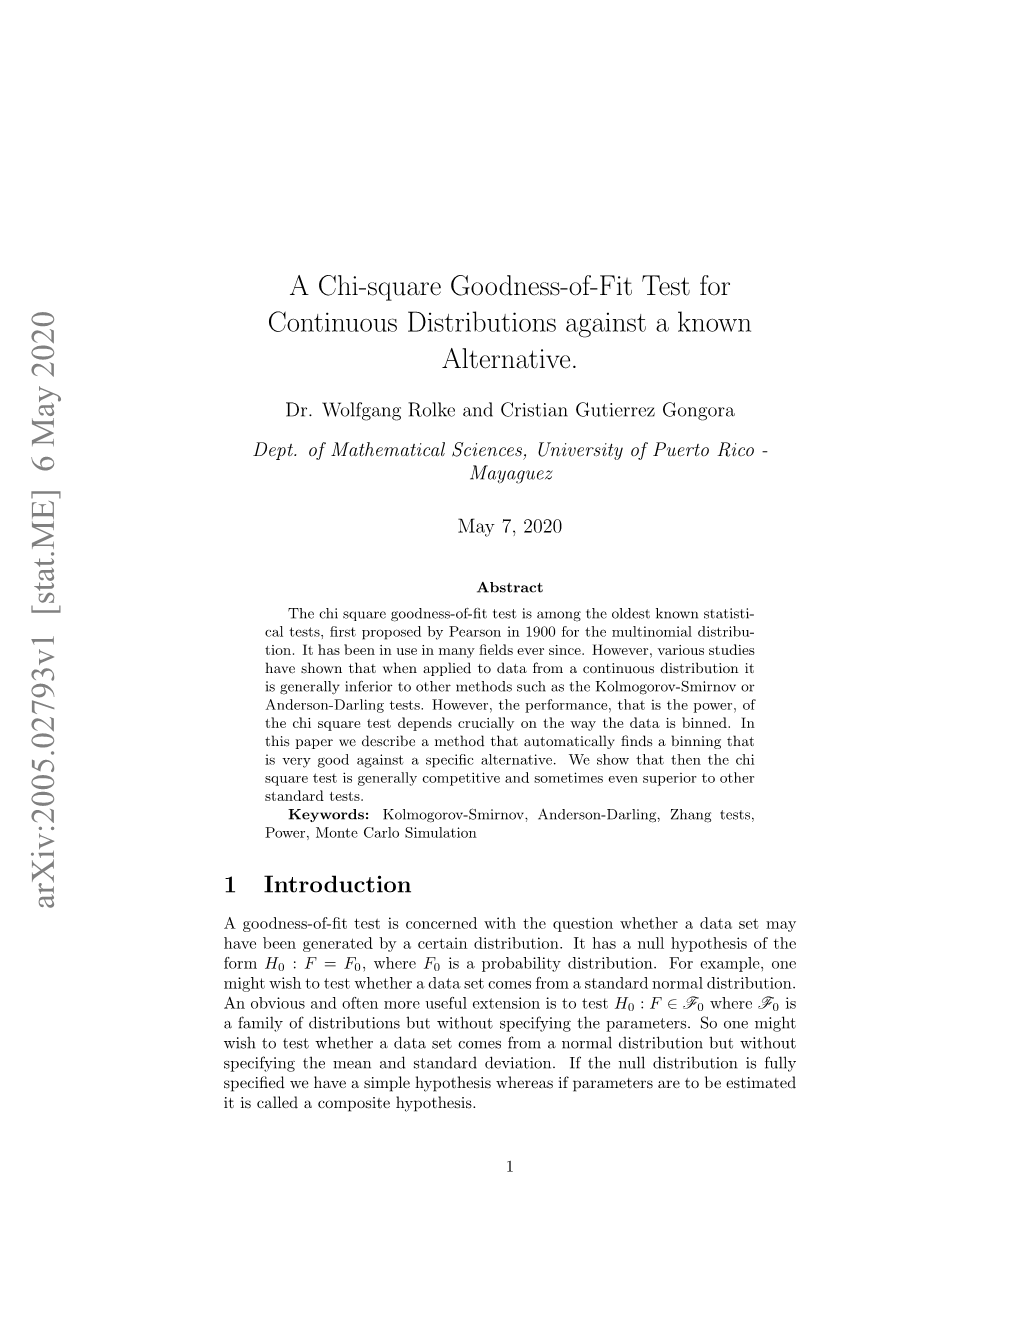 A Chi-Square Goodness-Of-Fit Test for Continuous Distributions